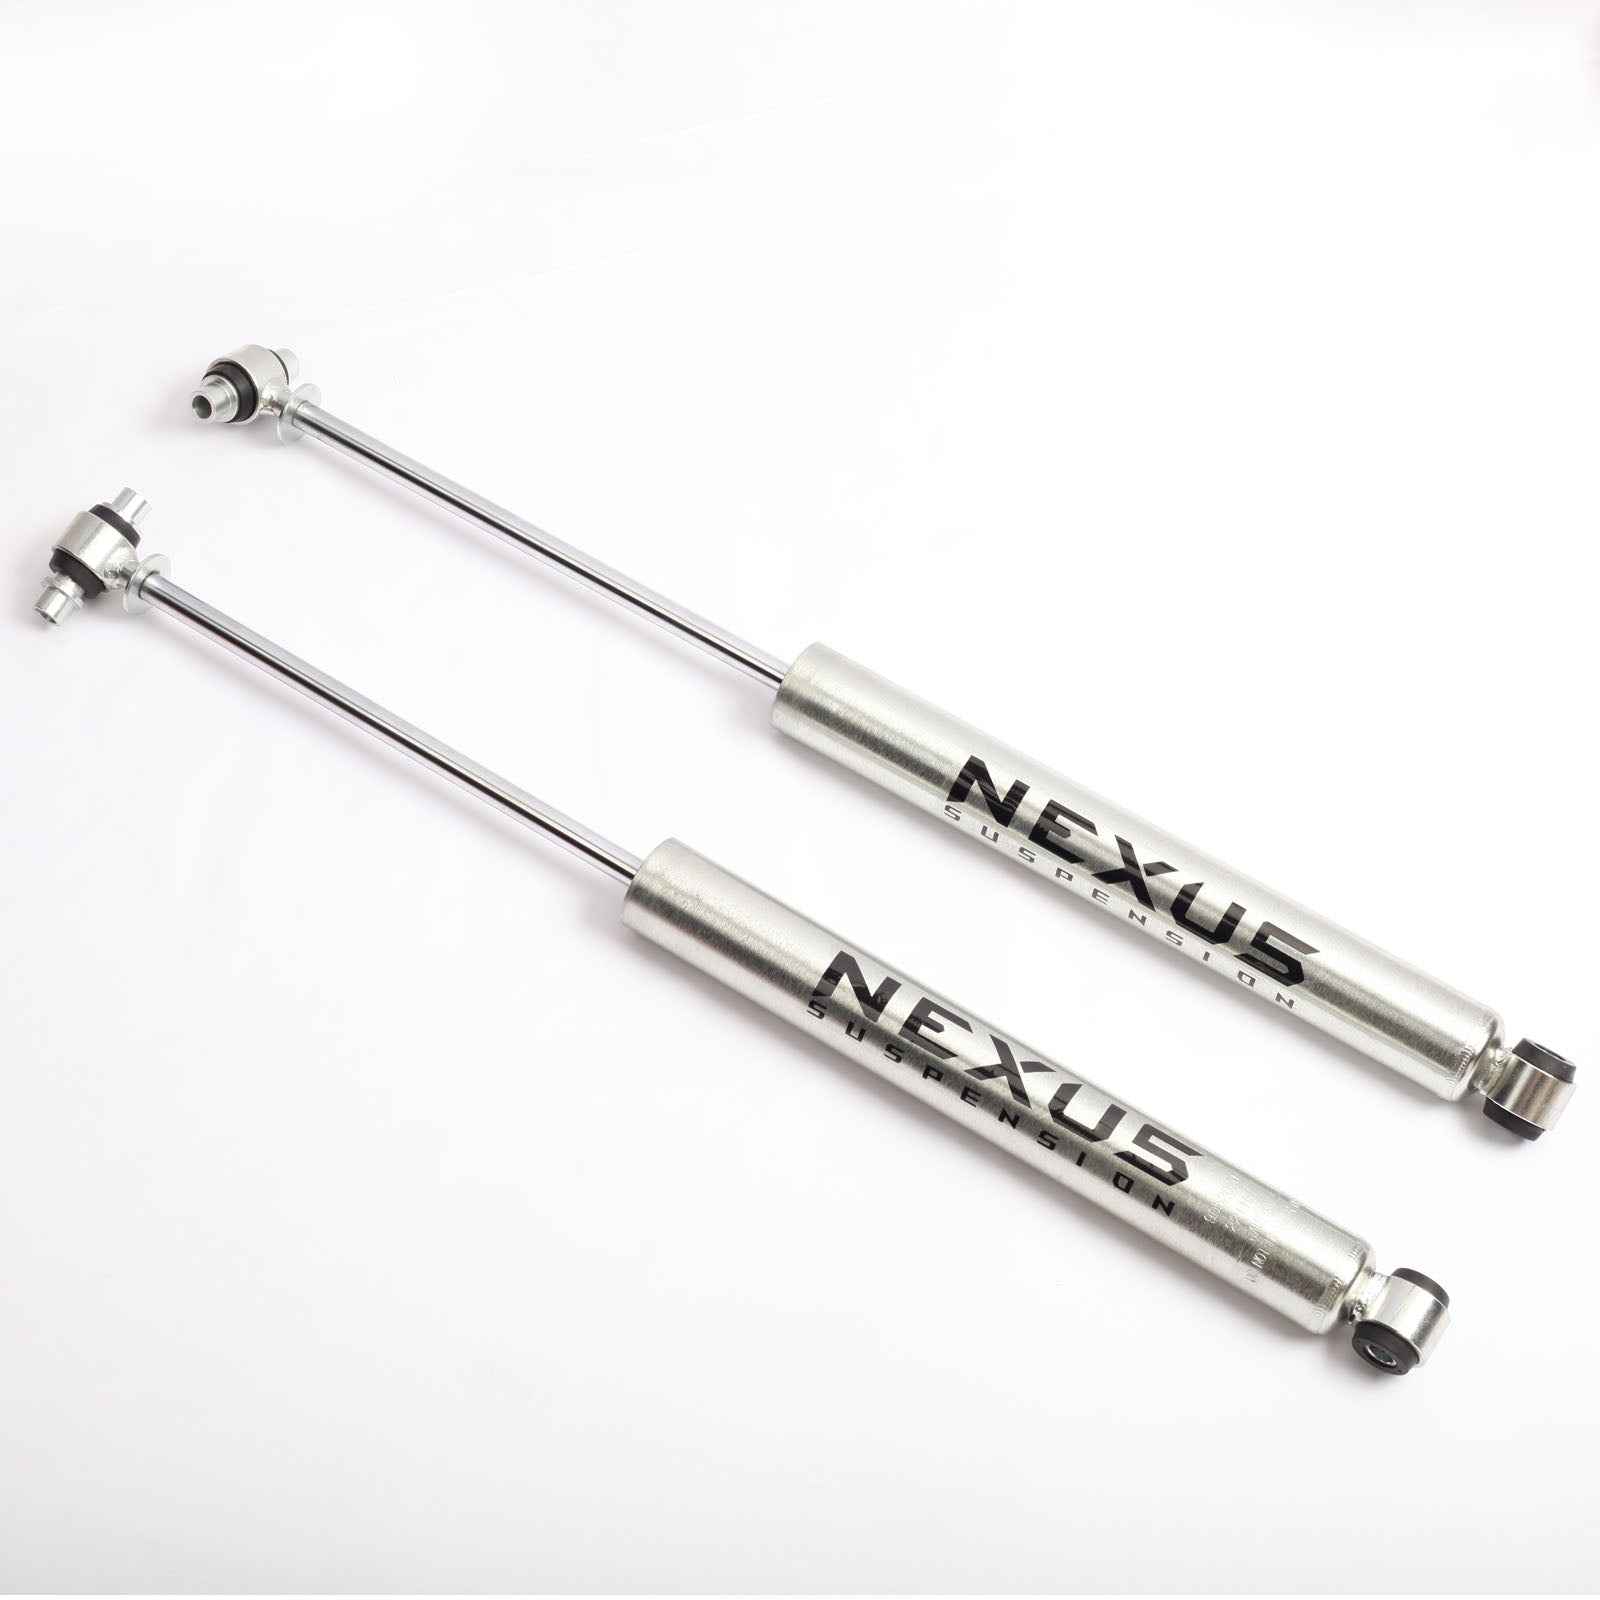 NEXUS SUSPENSION 3-4 Inch Lift Rear Shock Absorber for 2004-2021 Nissan Titan 2wd/4wd,Zinc Plated Coating,Pair Pack